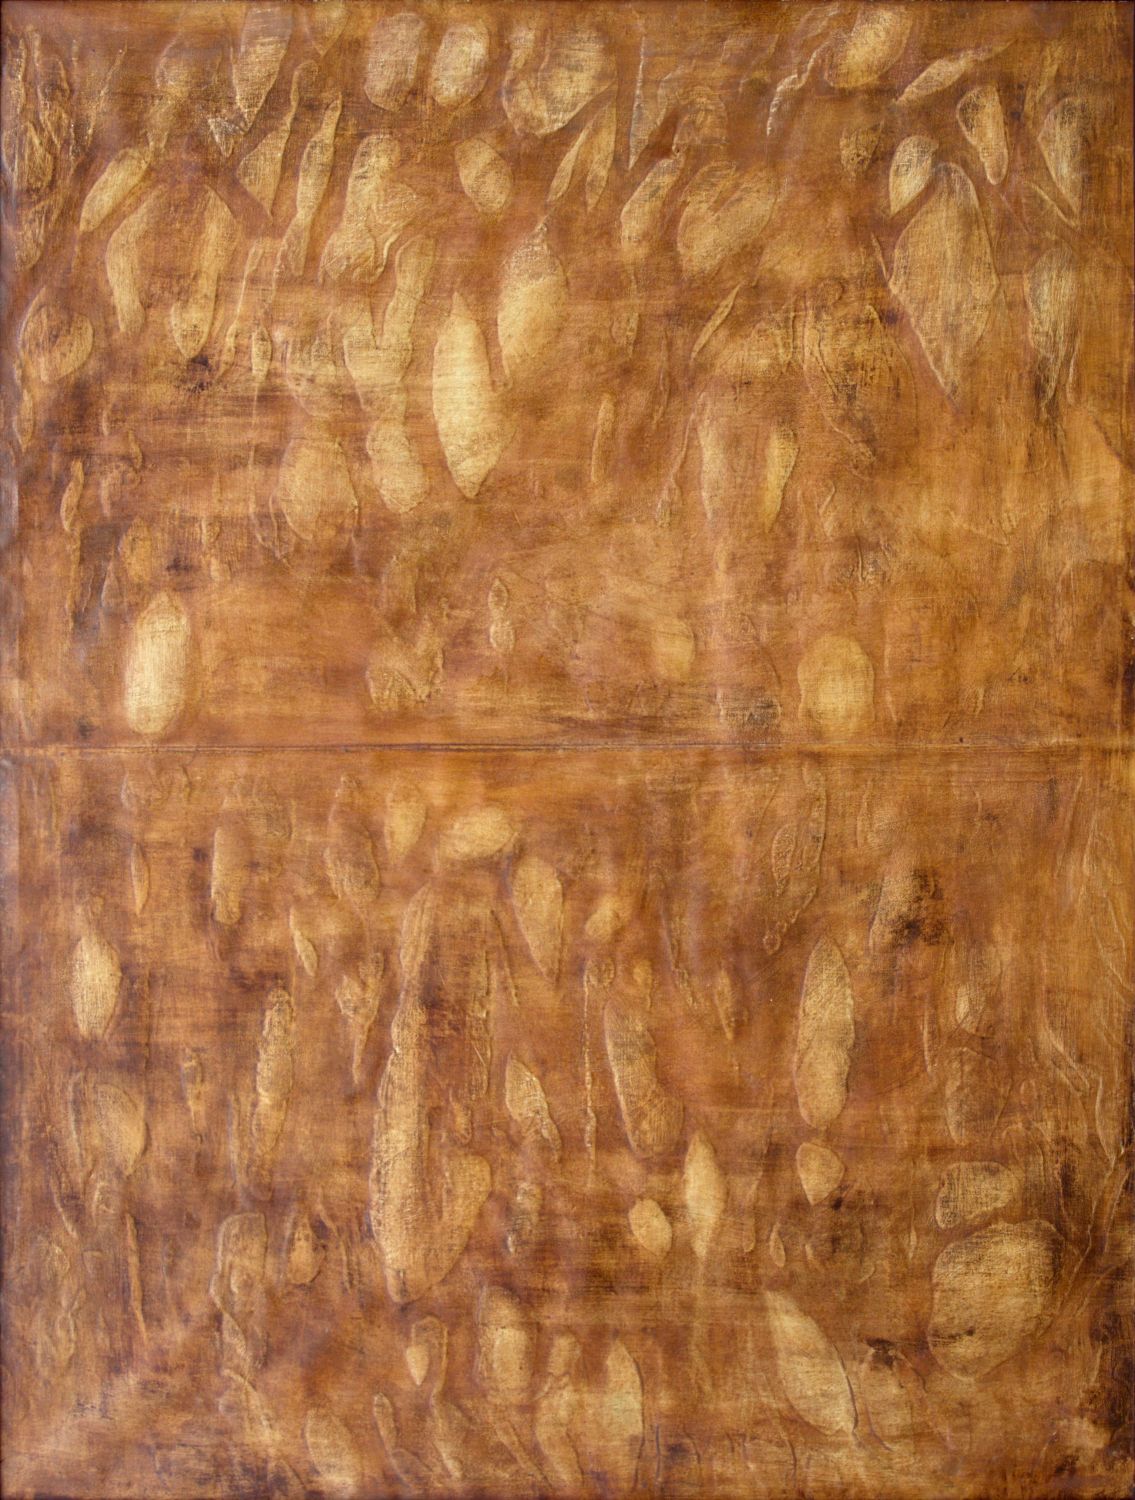 The Bloom of World (Respected Rebel), oil on canvas, 165x125 cm, 2000